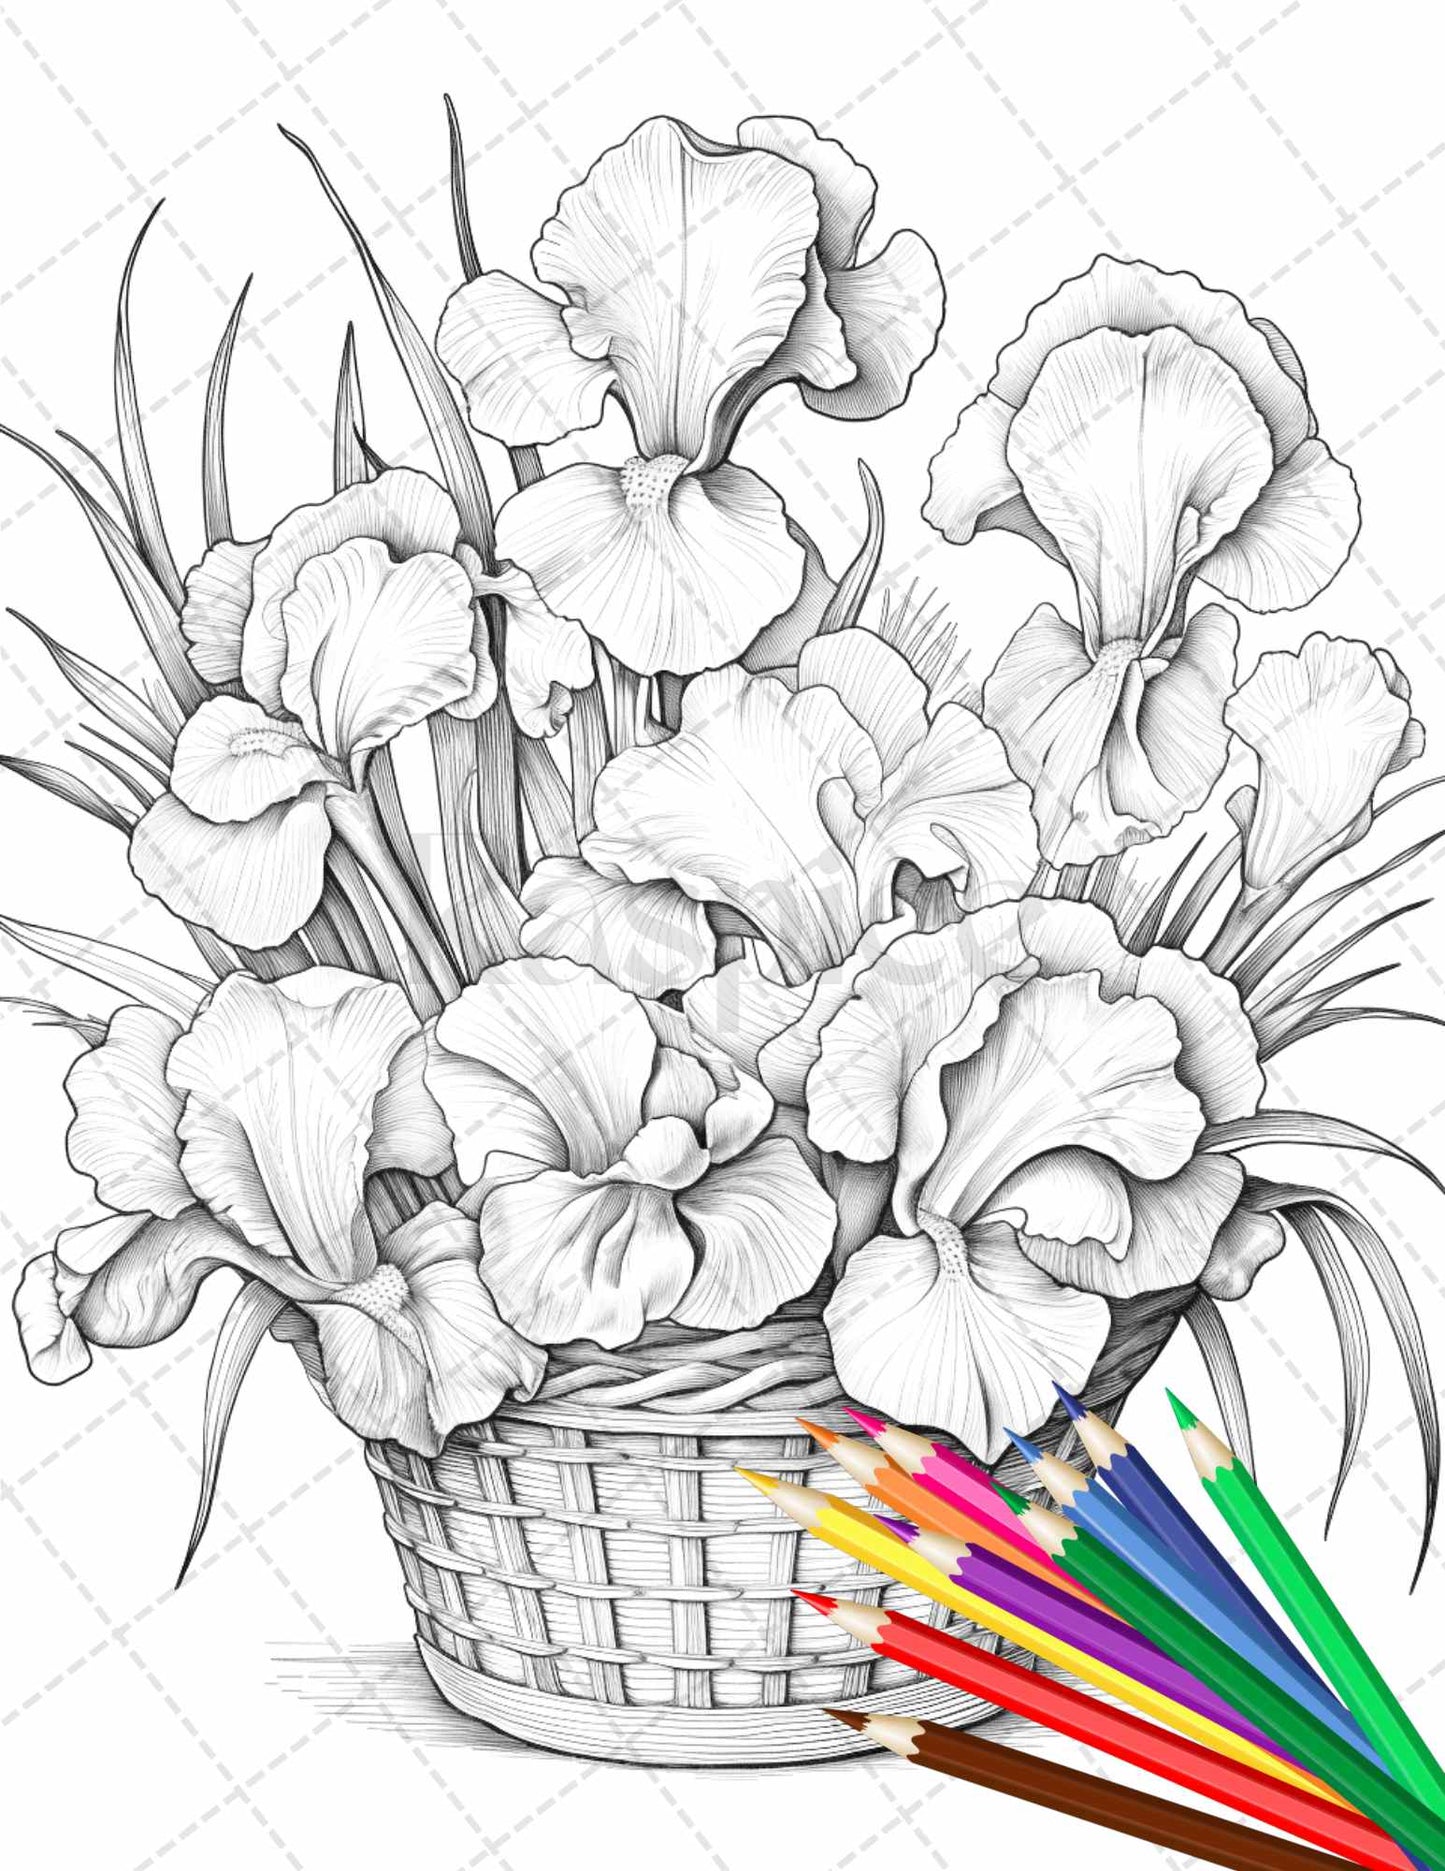 30 Flower Baskets Grayscale Coloring Pages for Adults, PDF File Instant Download - raspiee